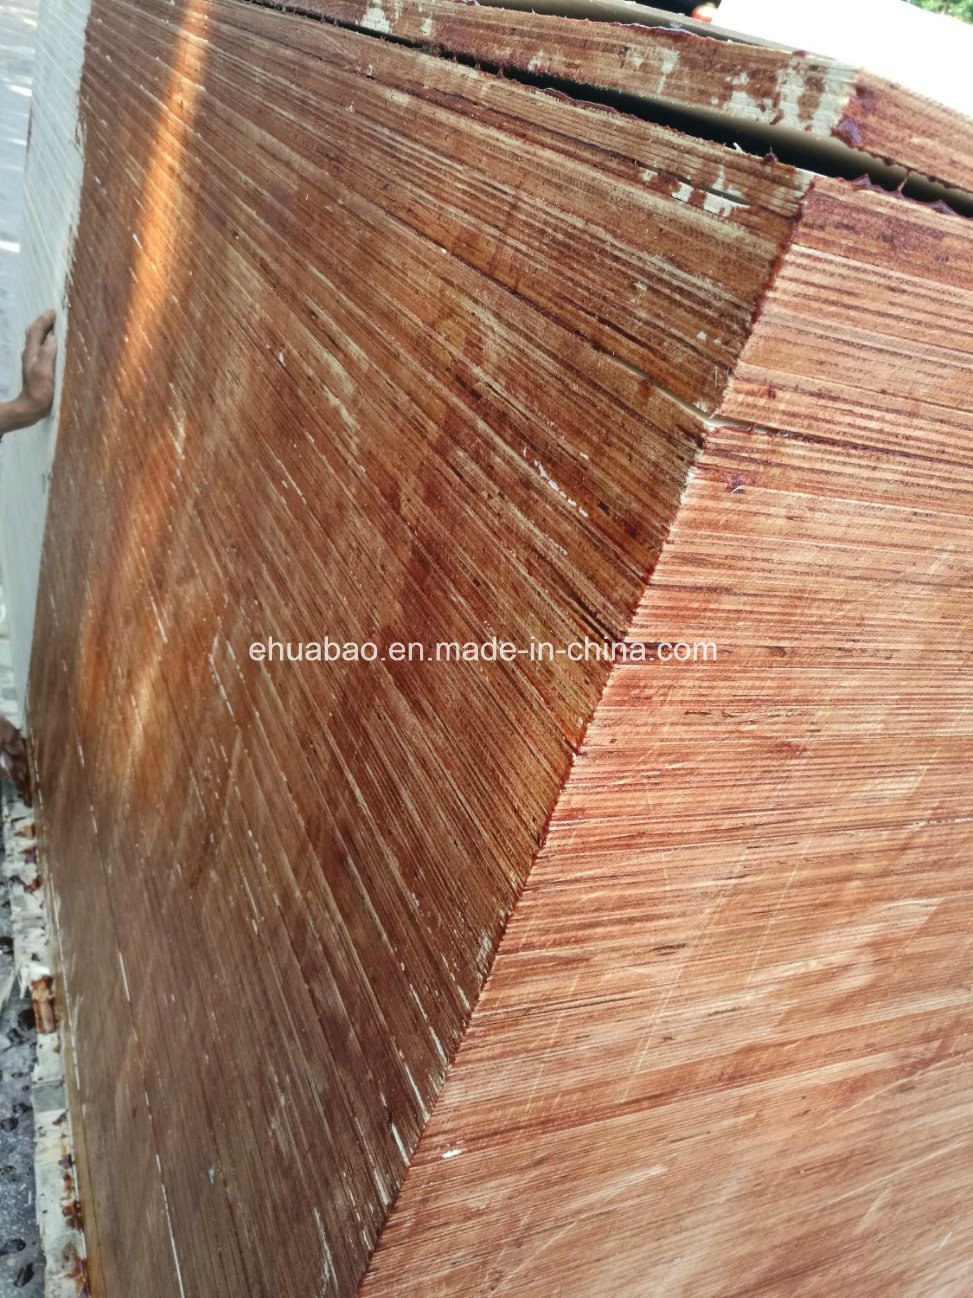 Hardwood Core Pg Super Film Faced Plywood for Constructions